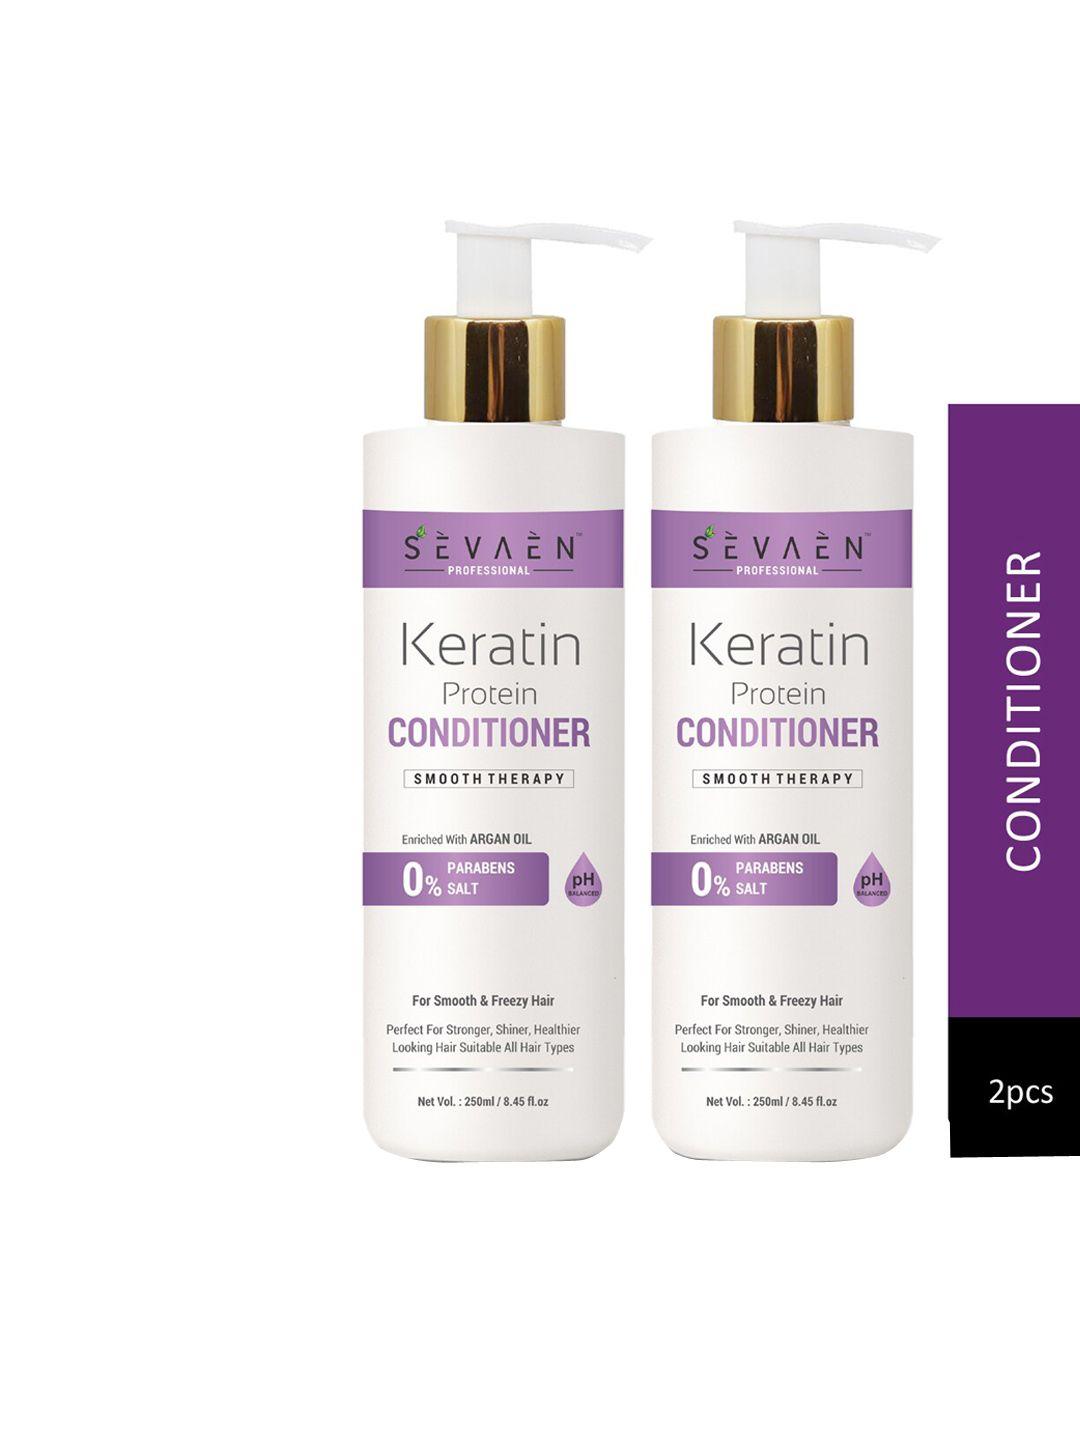 sevaen set of 2 smooth therapy keratin protein conditioners with argan oil - 250ml each